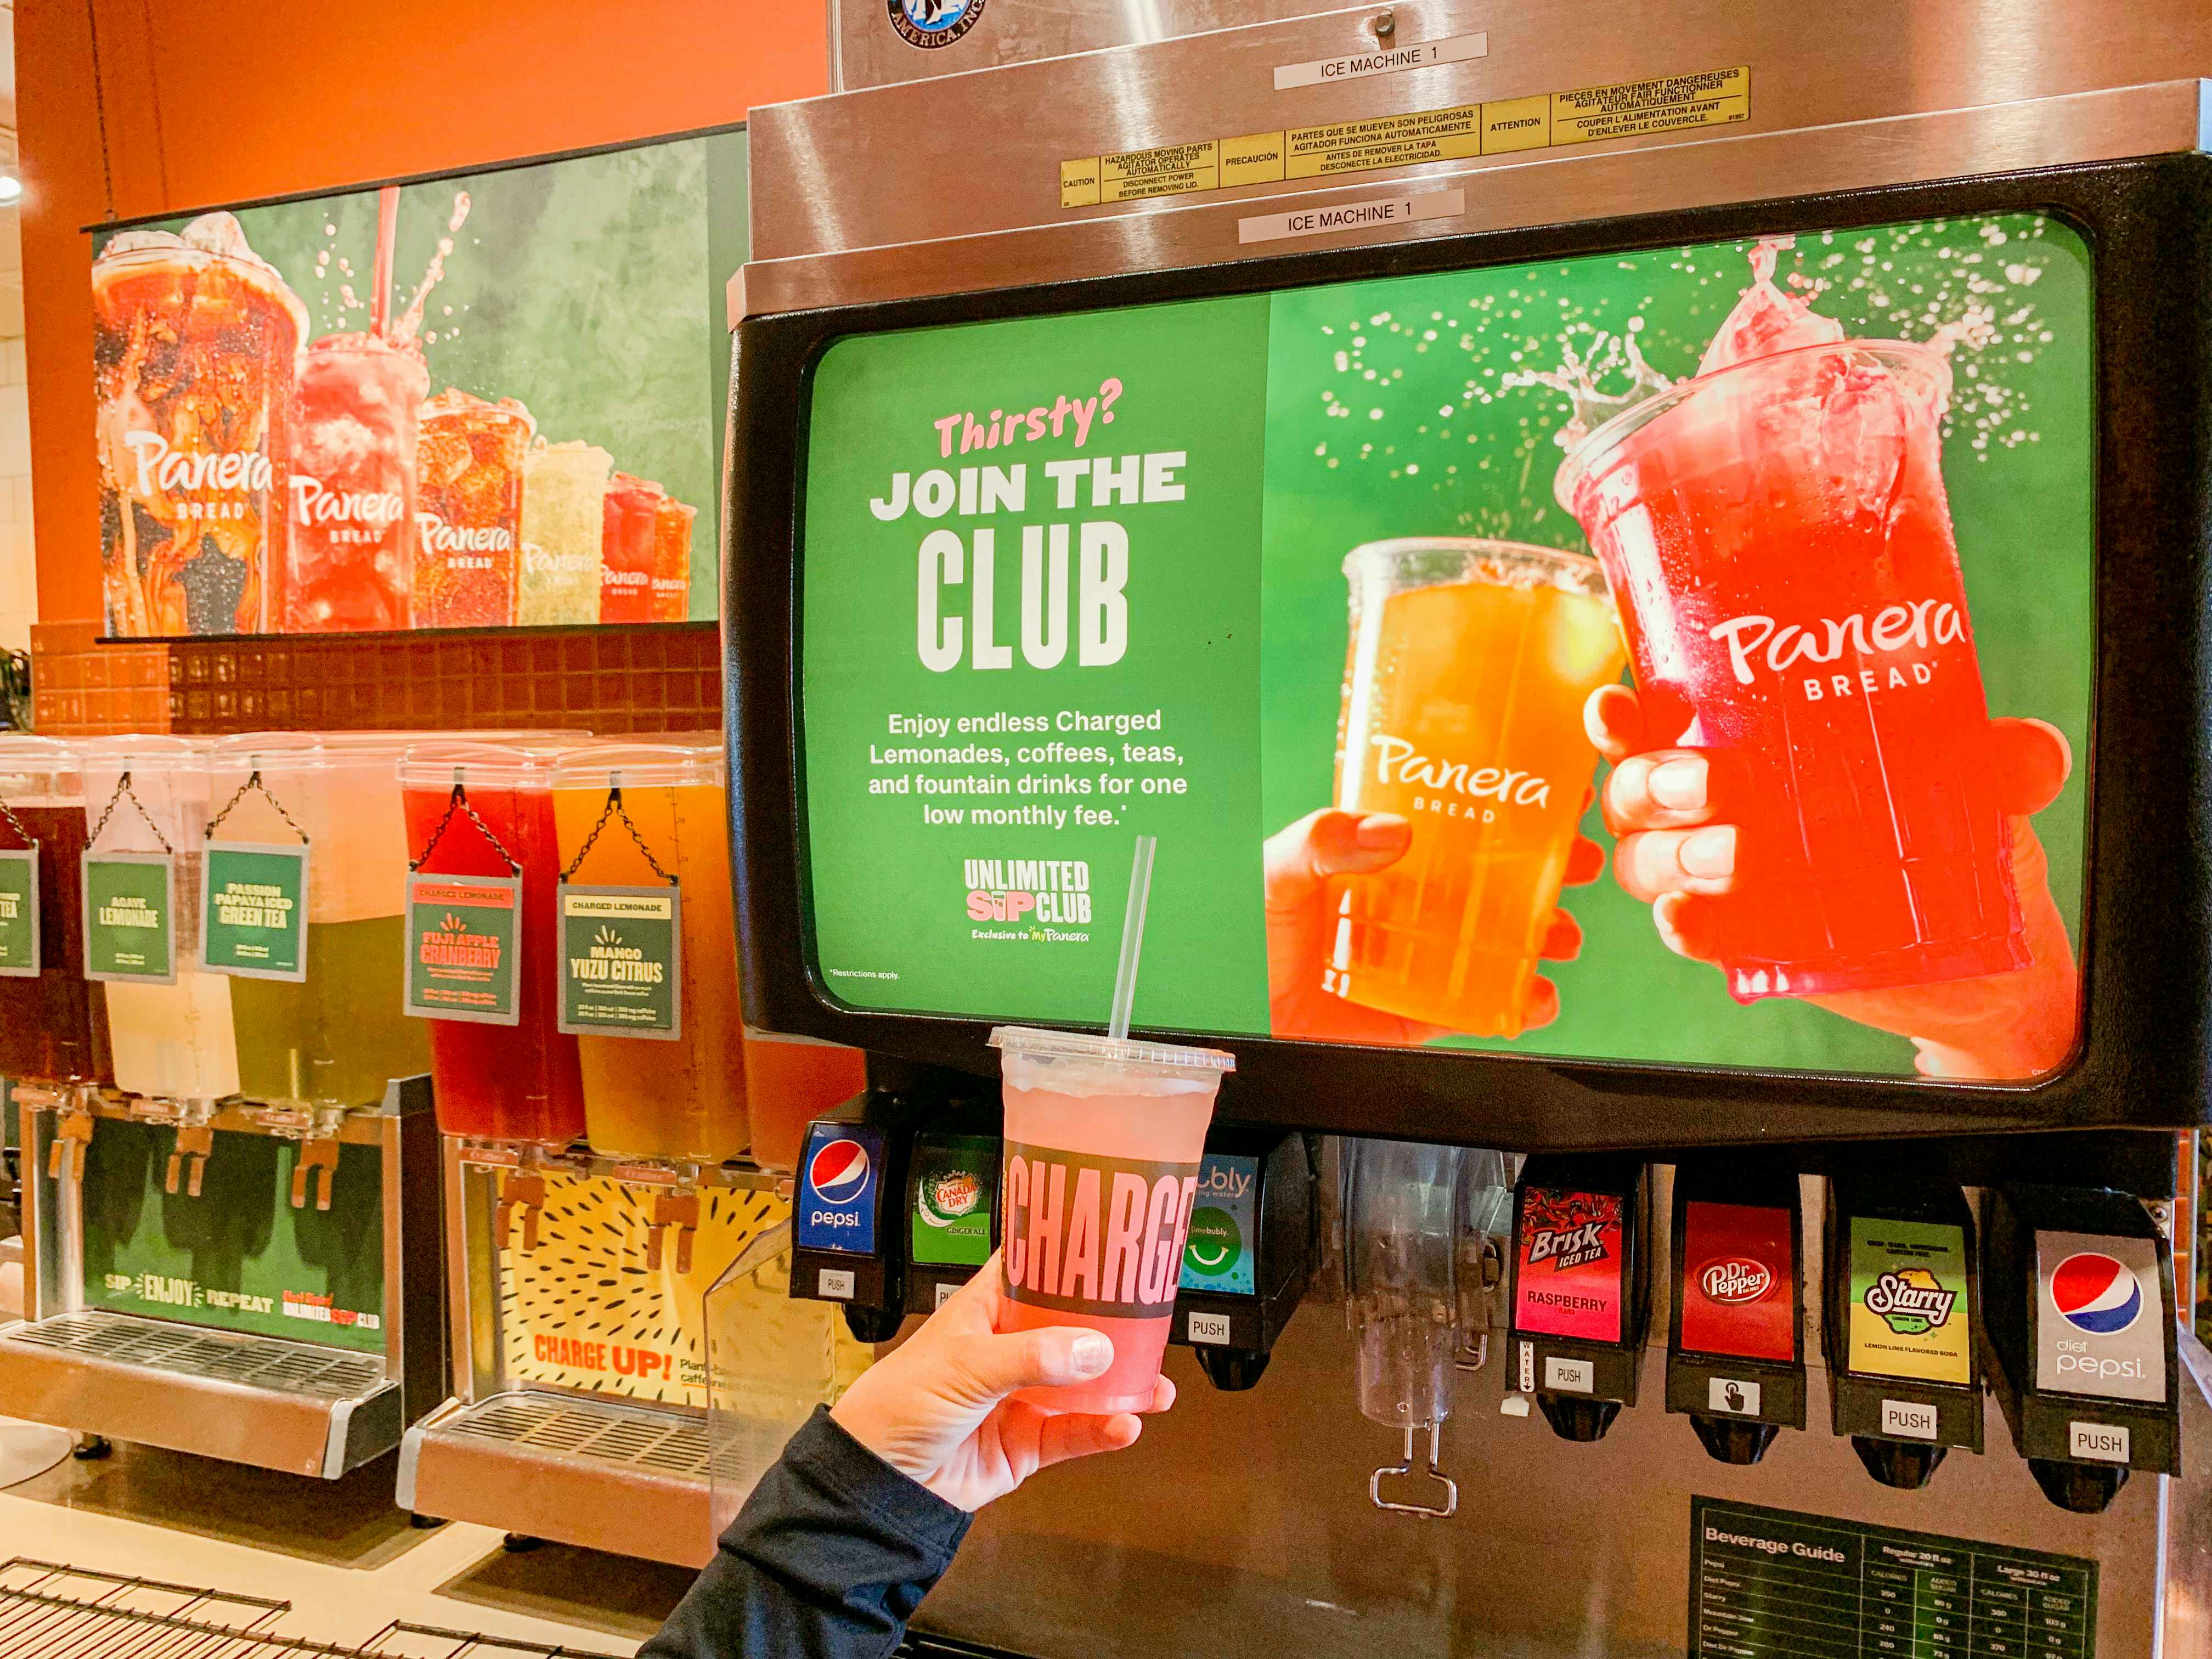 panera drink area with drink being held up in store